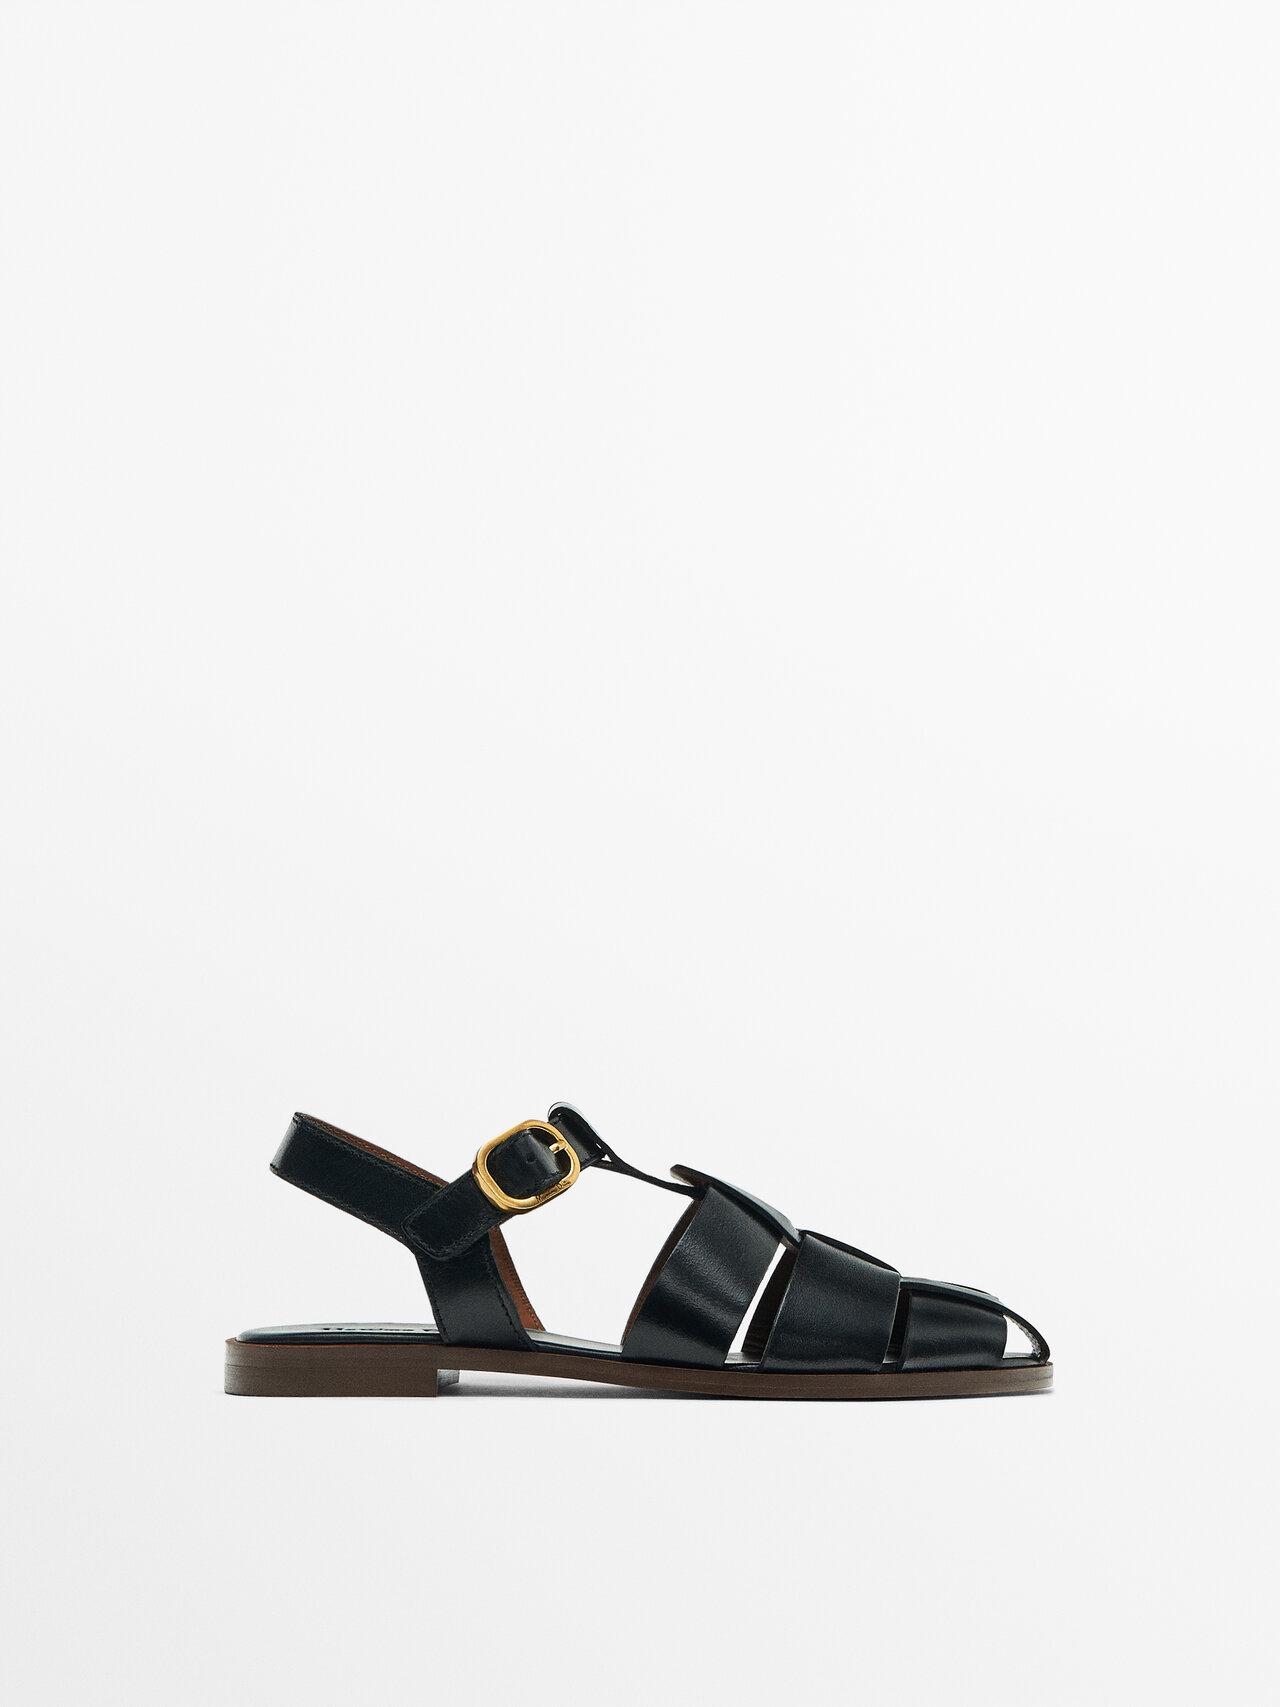 MASSIMO DUTTI Buckled Cage Sandals in White | Lyst